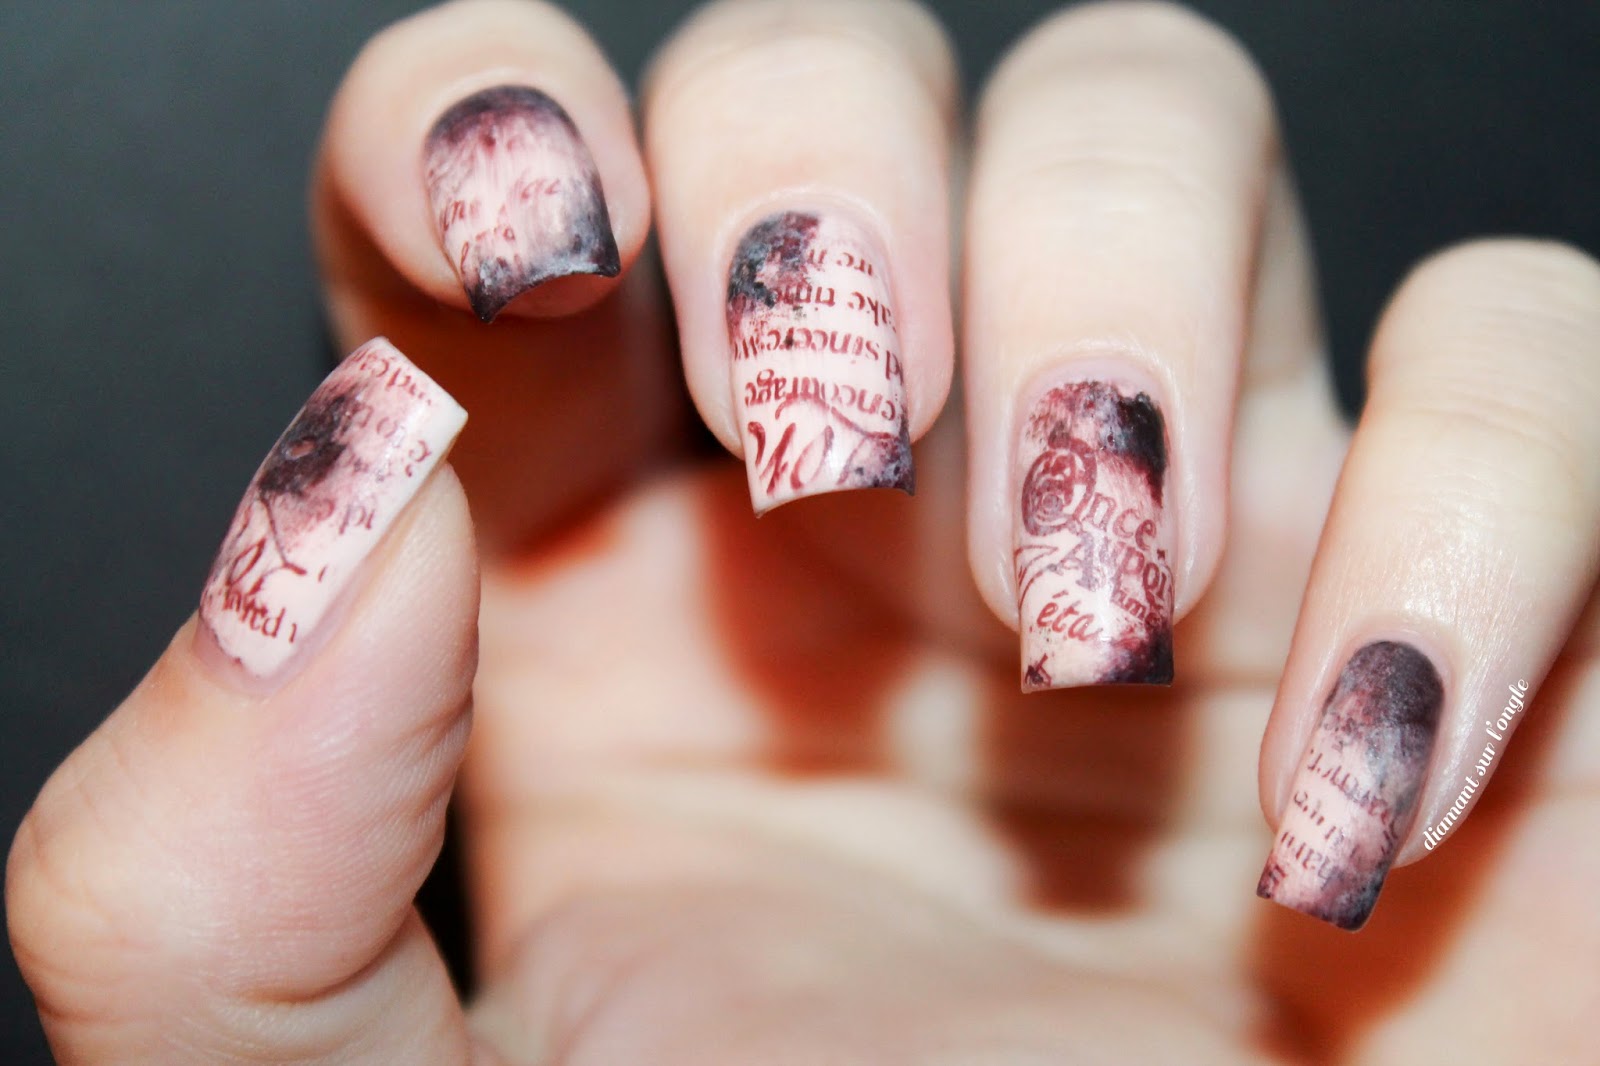 Old book page's nail art